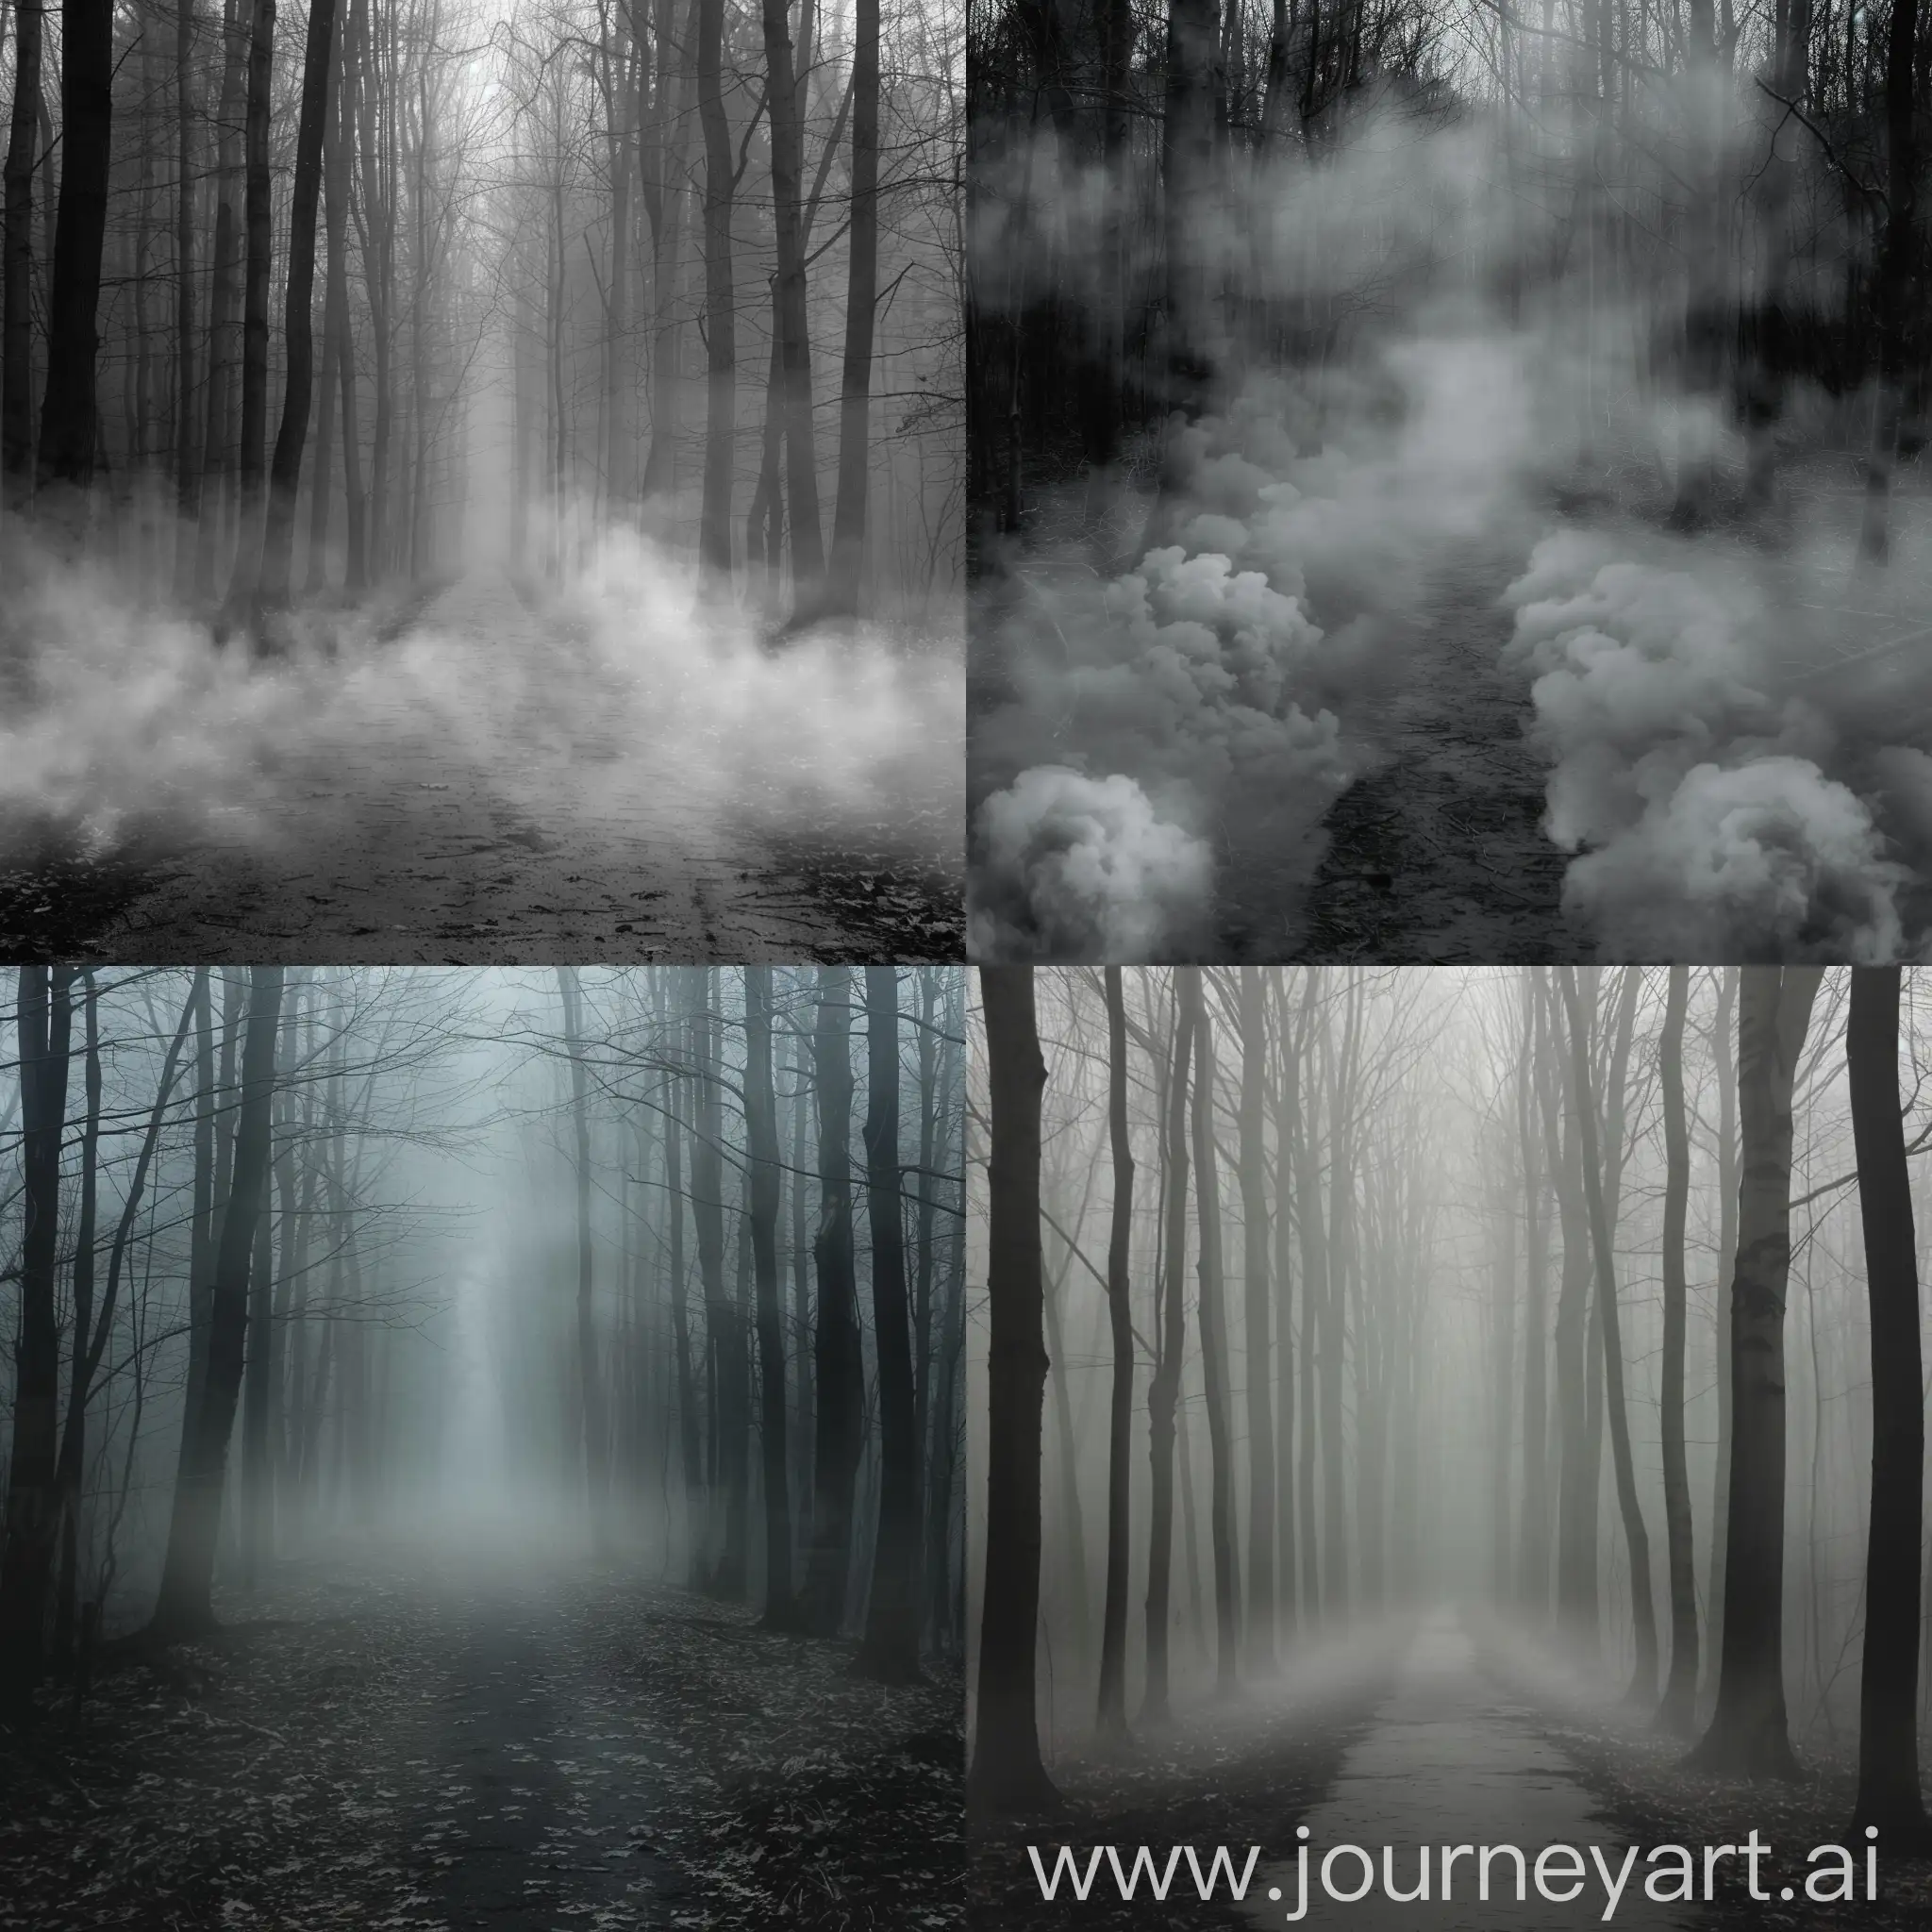 forest, very thick fog, thick fog spreading along the ground, straight path in the middle, gloomy, horror style